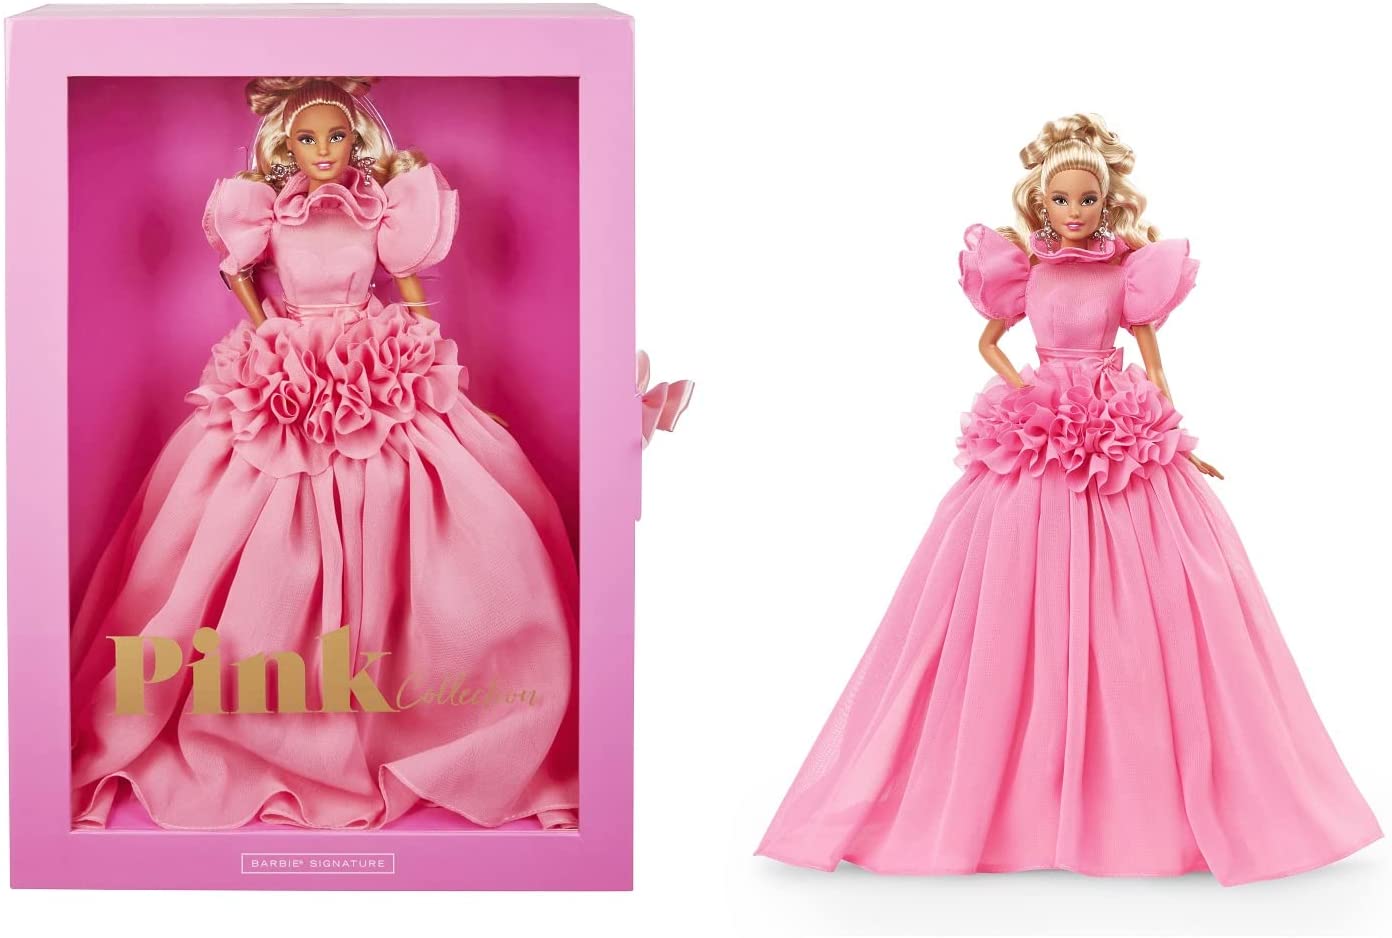 Doll Collectors Convention | Barbie Doll, friends and family